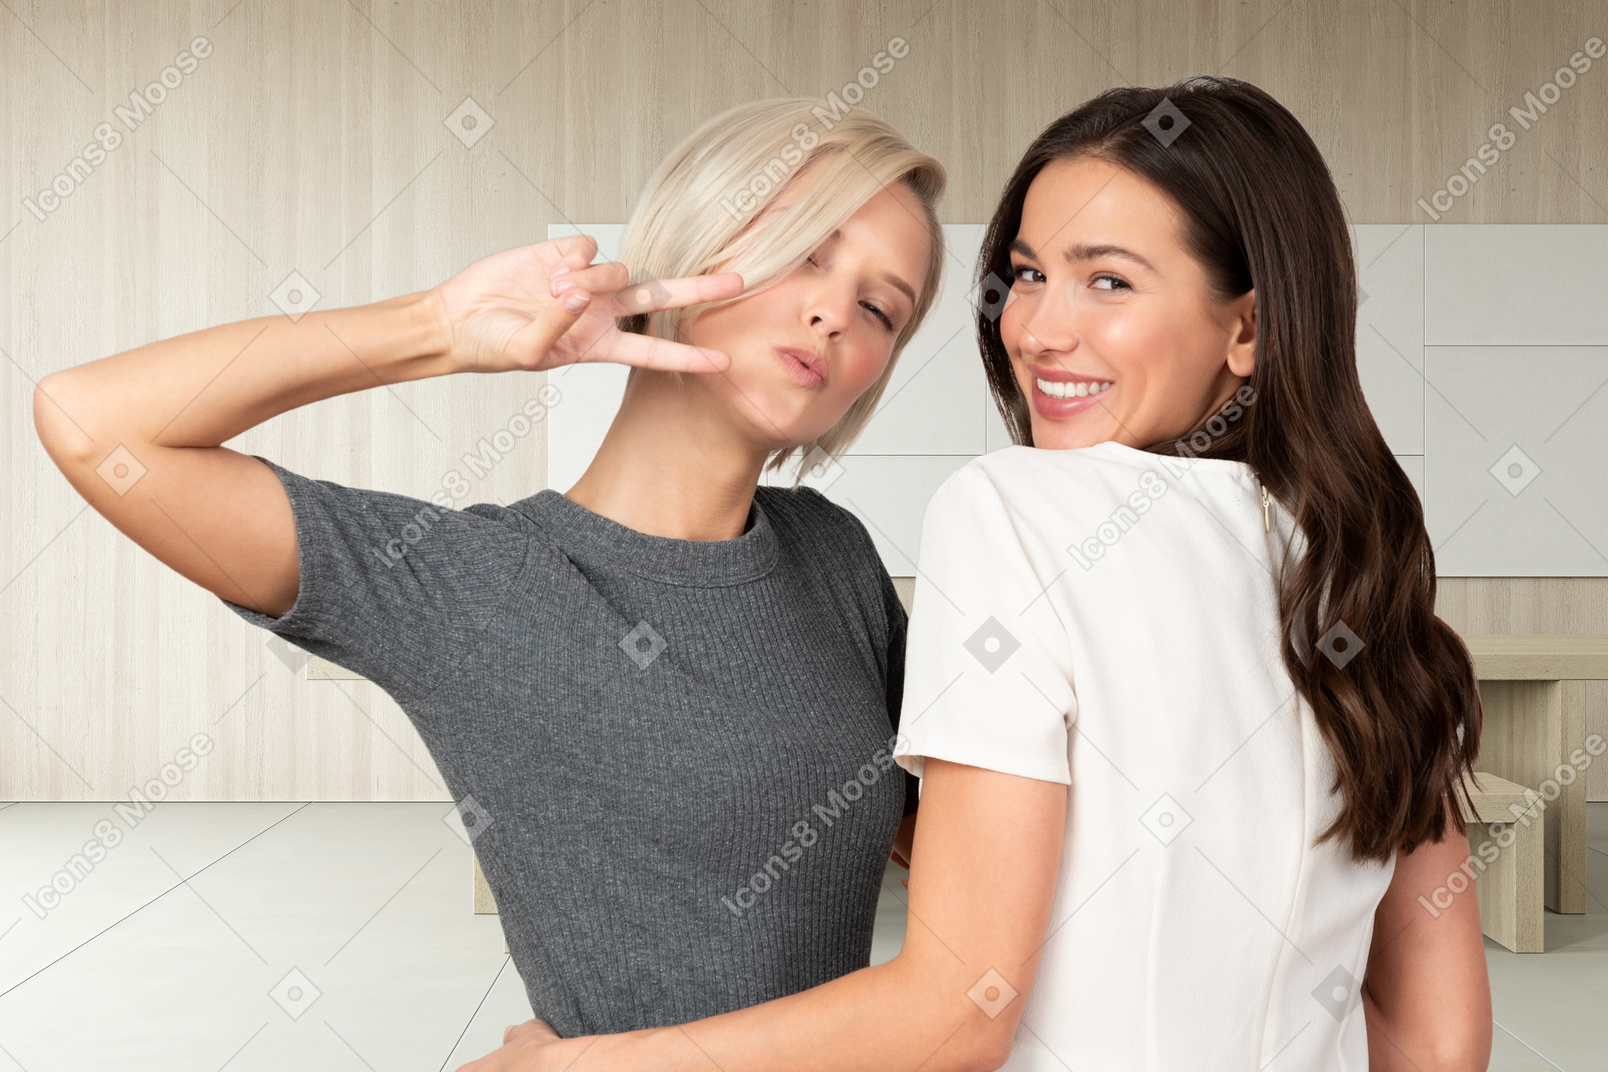 Two women hugging and making a peace sign